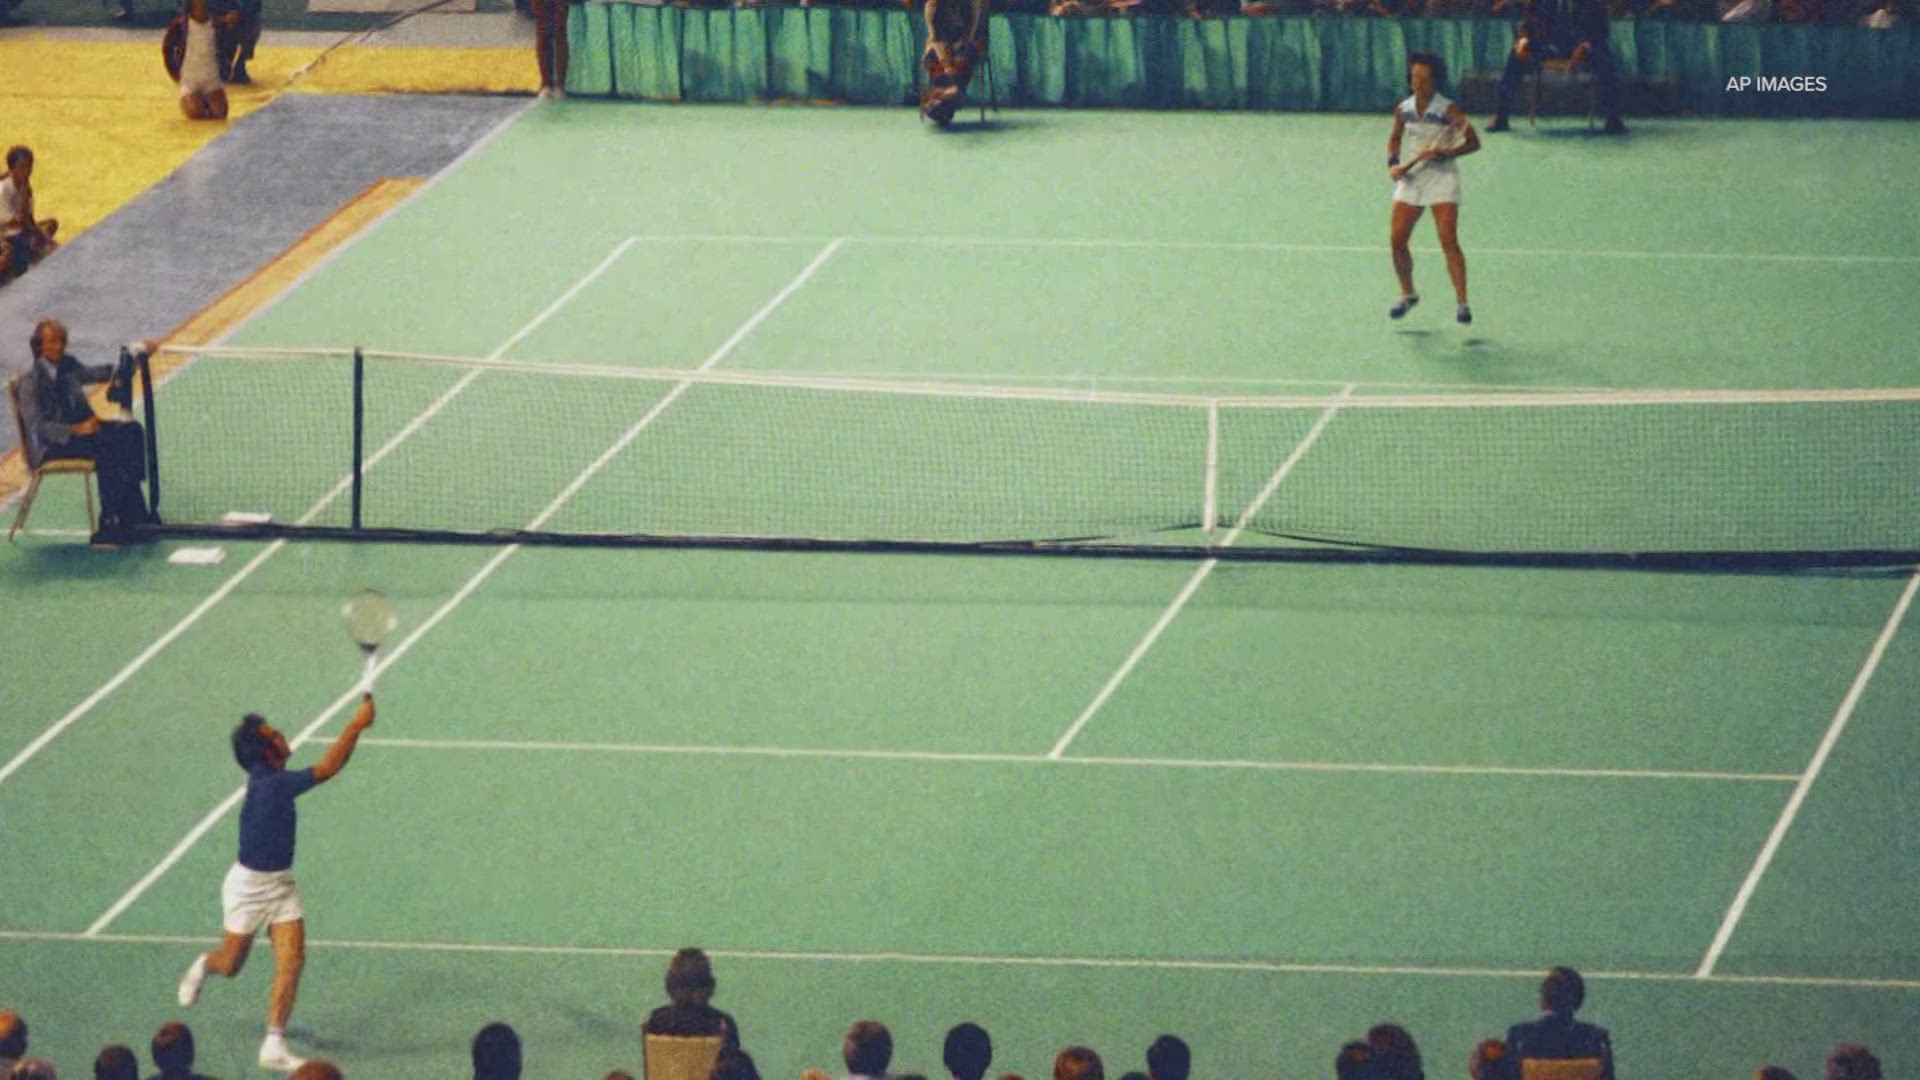 Two former ball girls at the match between Billie Jean King and Bobby Riggs recall that day and the impact it had on women everywhere.